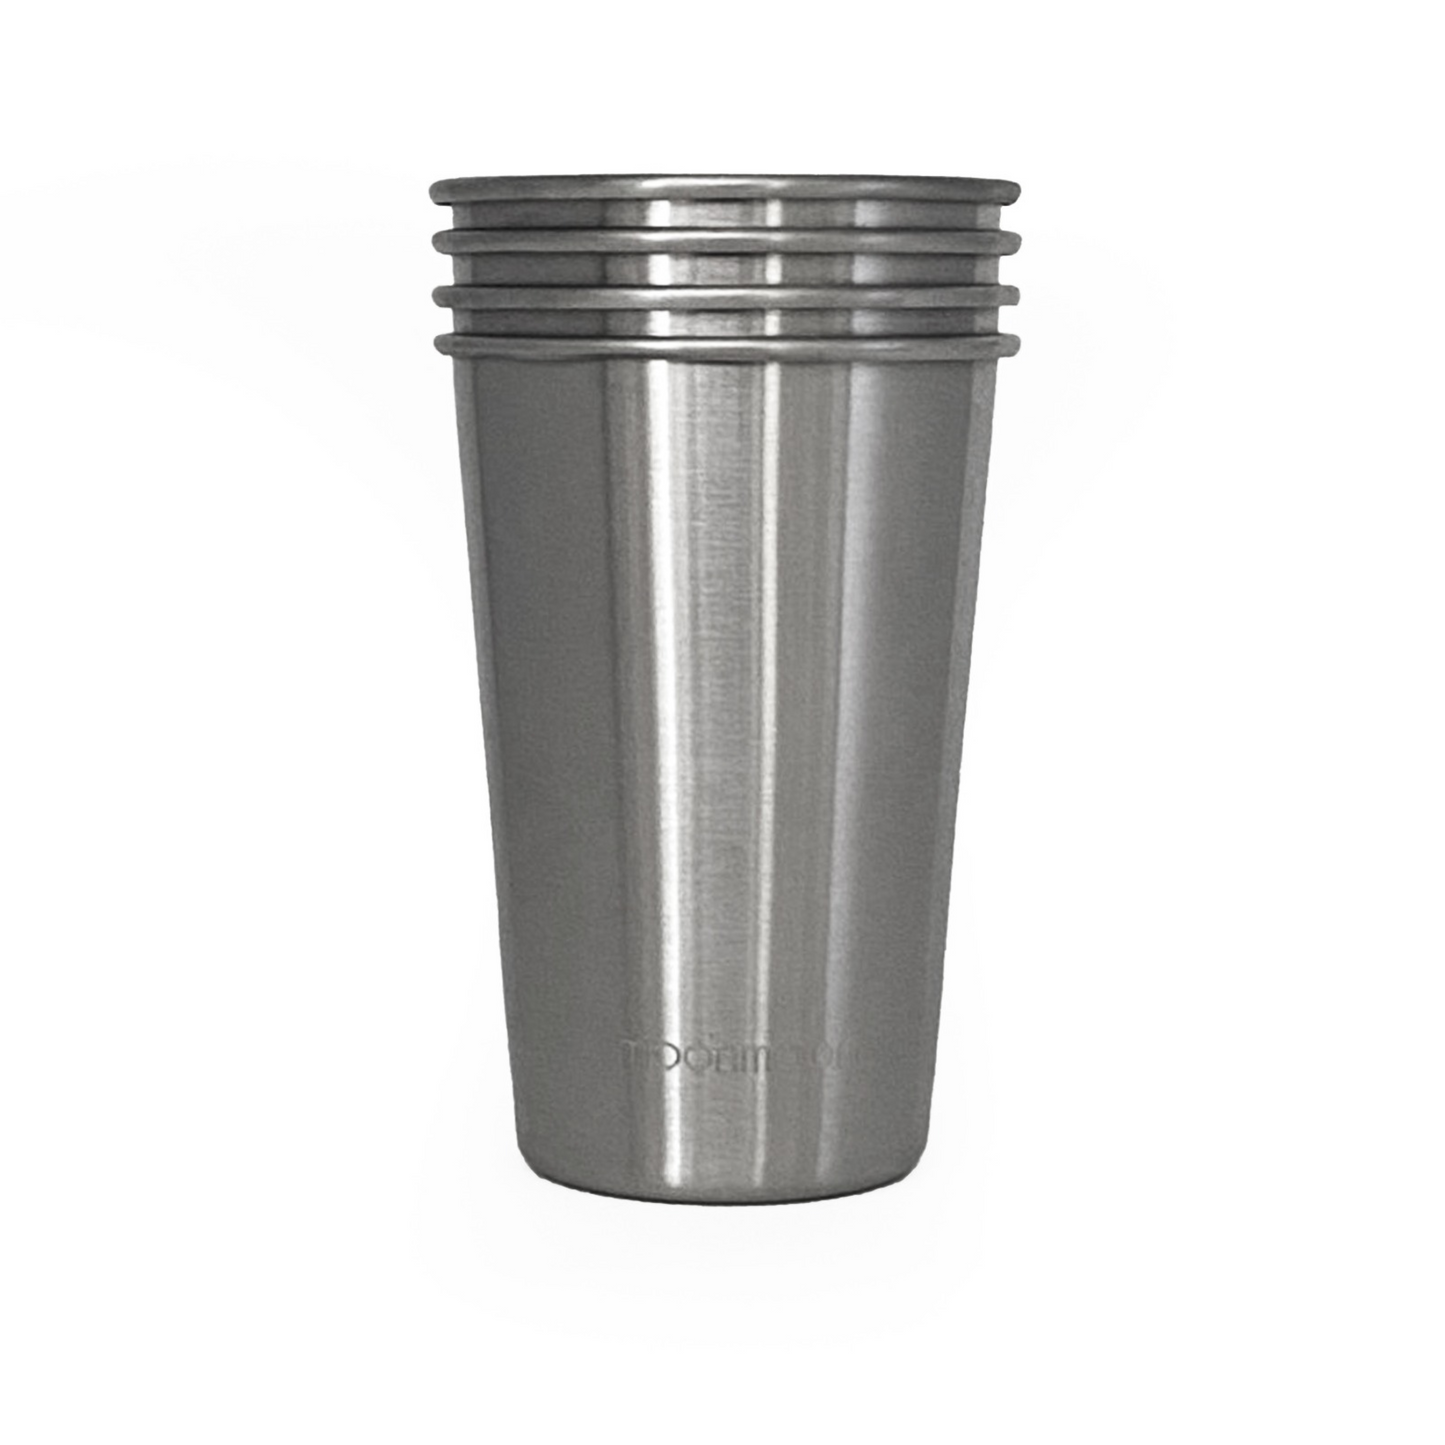 16 Pack Stainless Steel Cups for Kids and Adult Pint Cup Tumbler